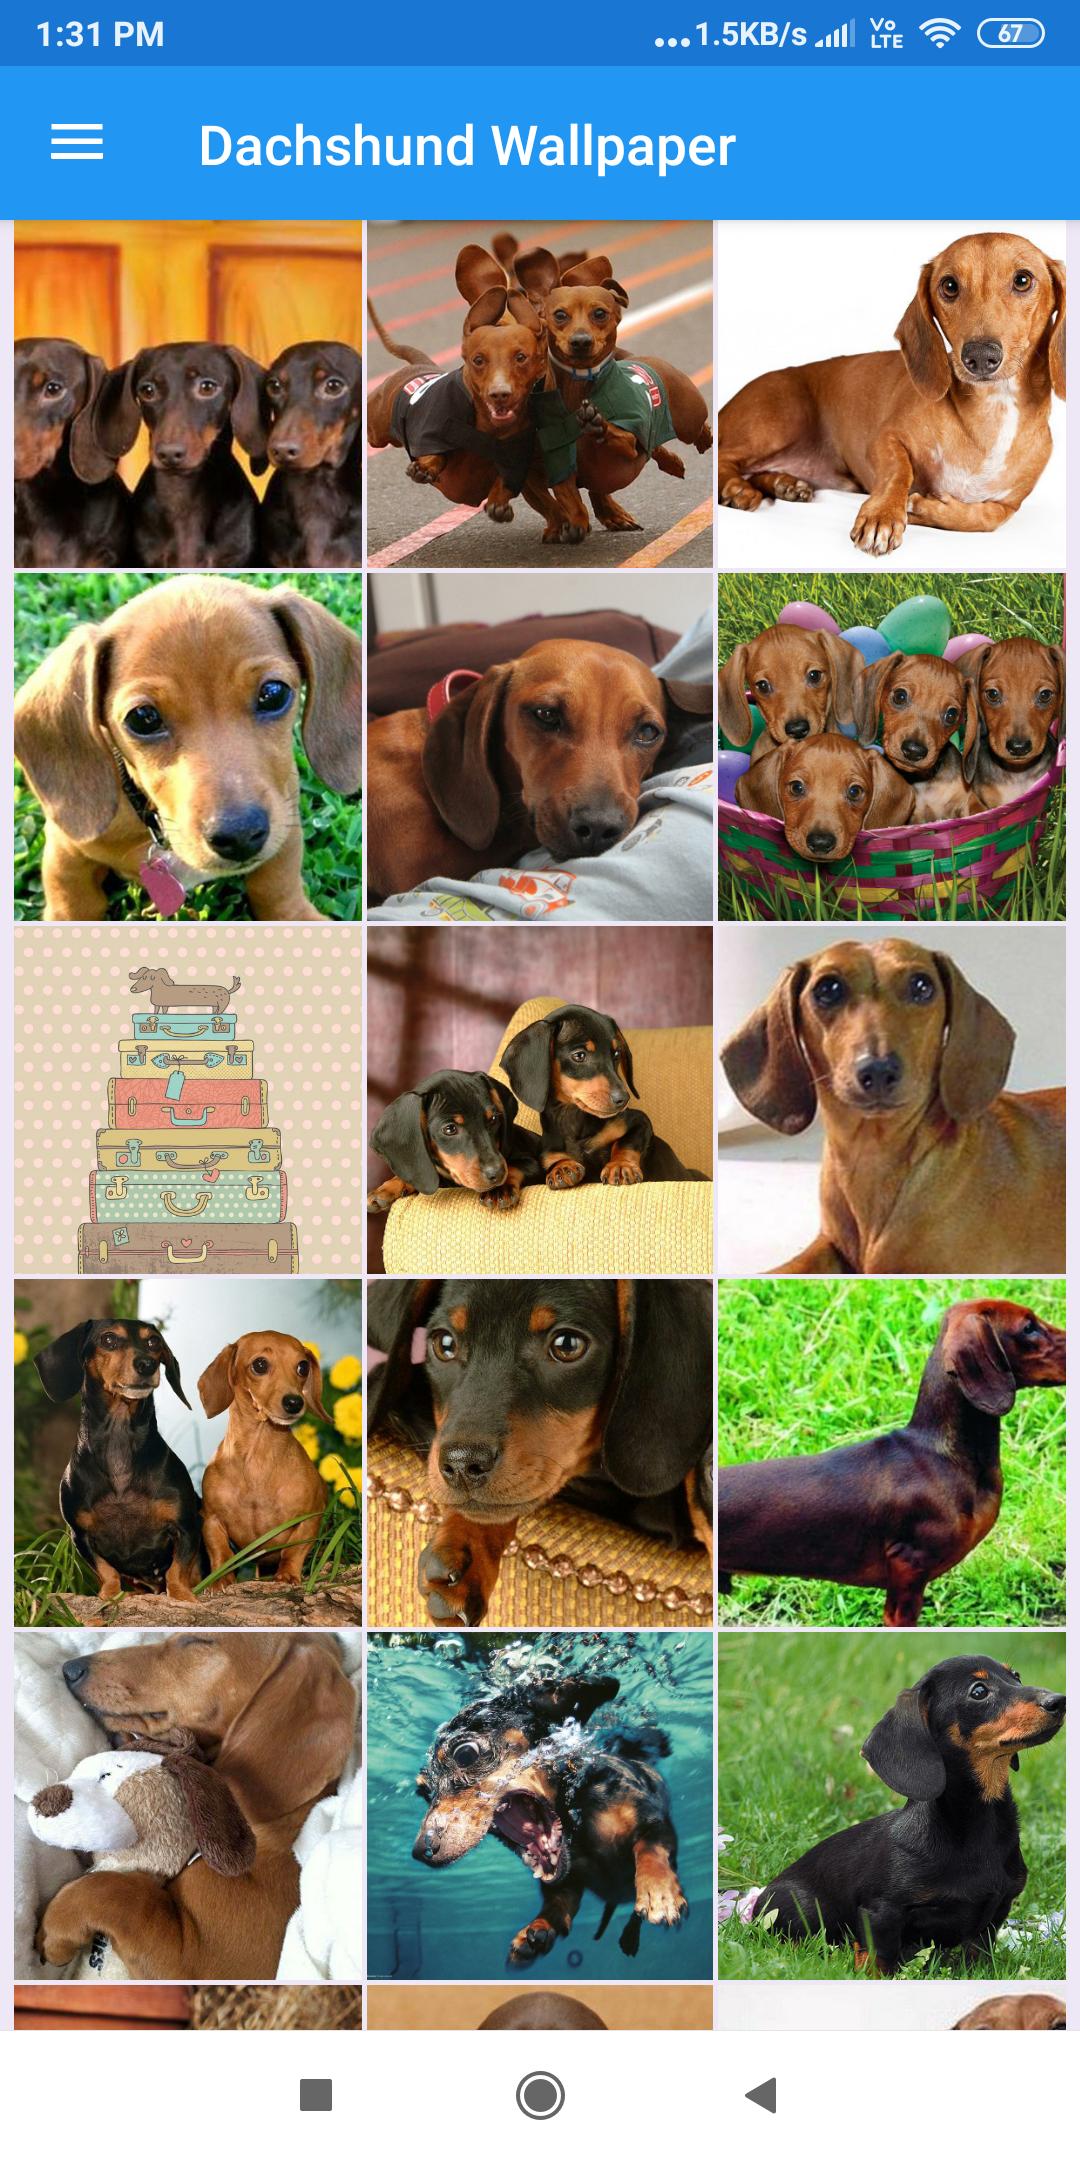 Dachshund Wallpapers: HD Images,Free Pics download 2.0.37 Screenshot 5